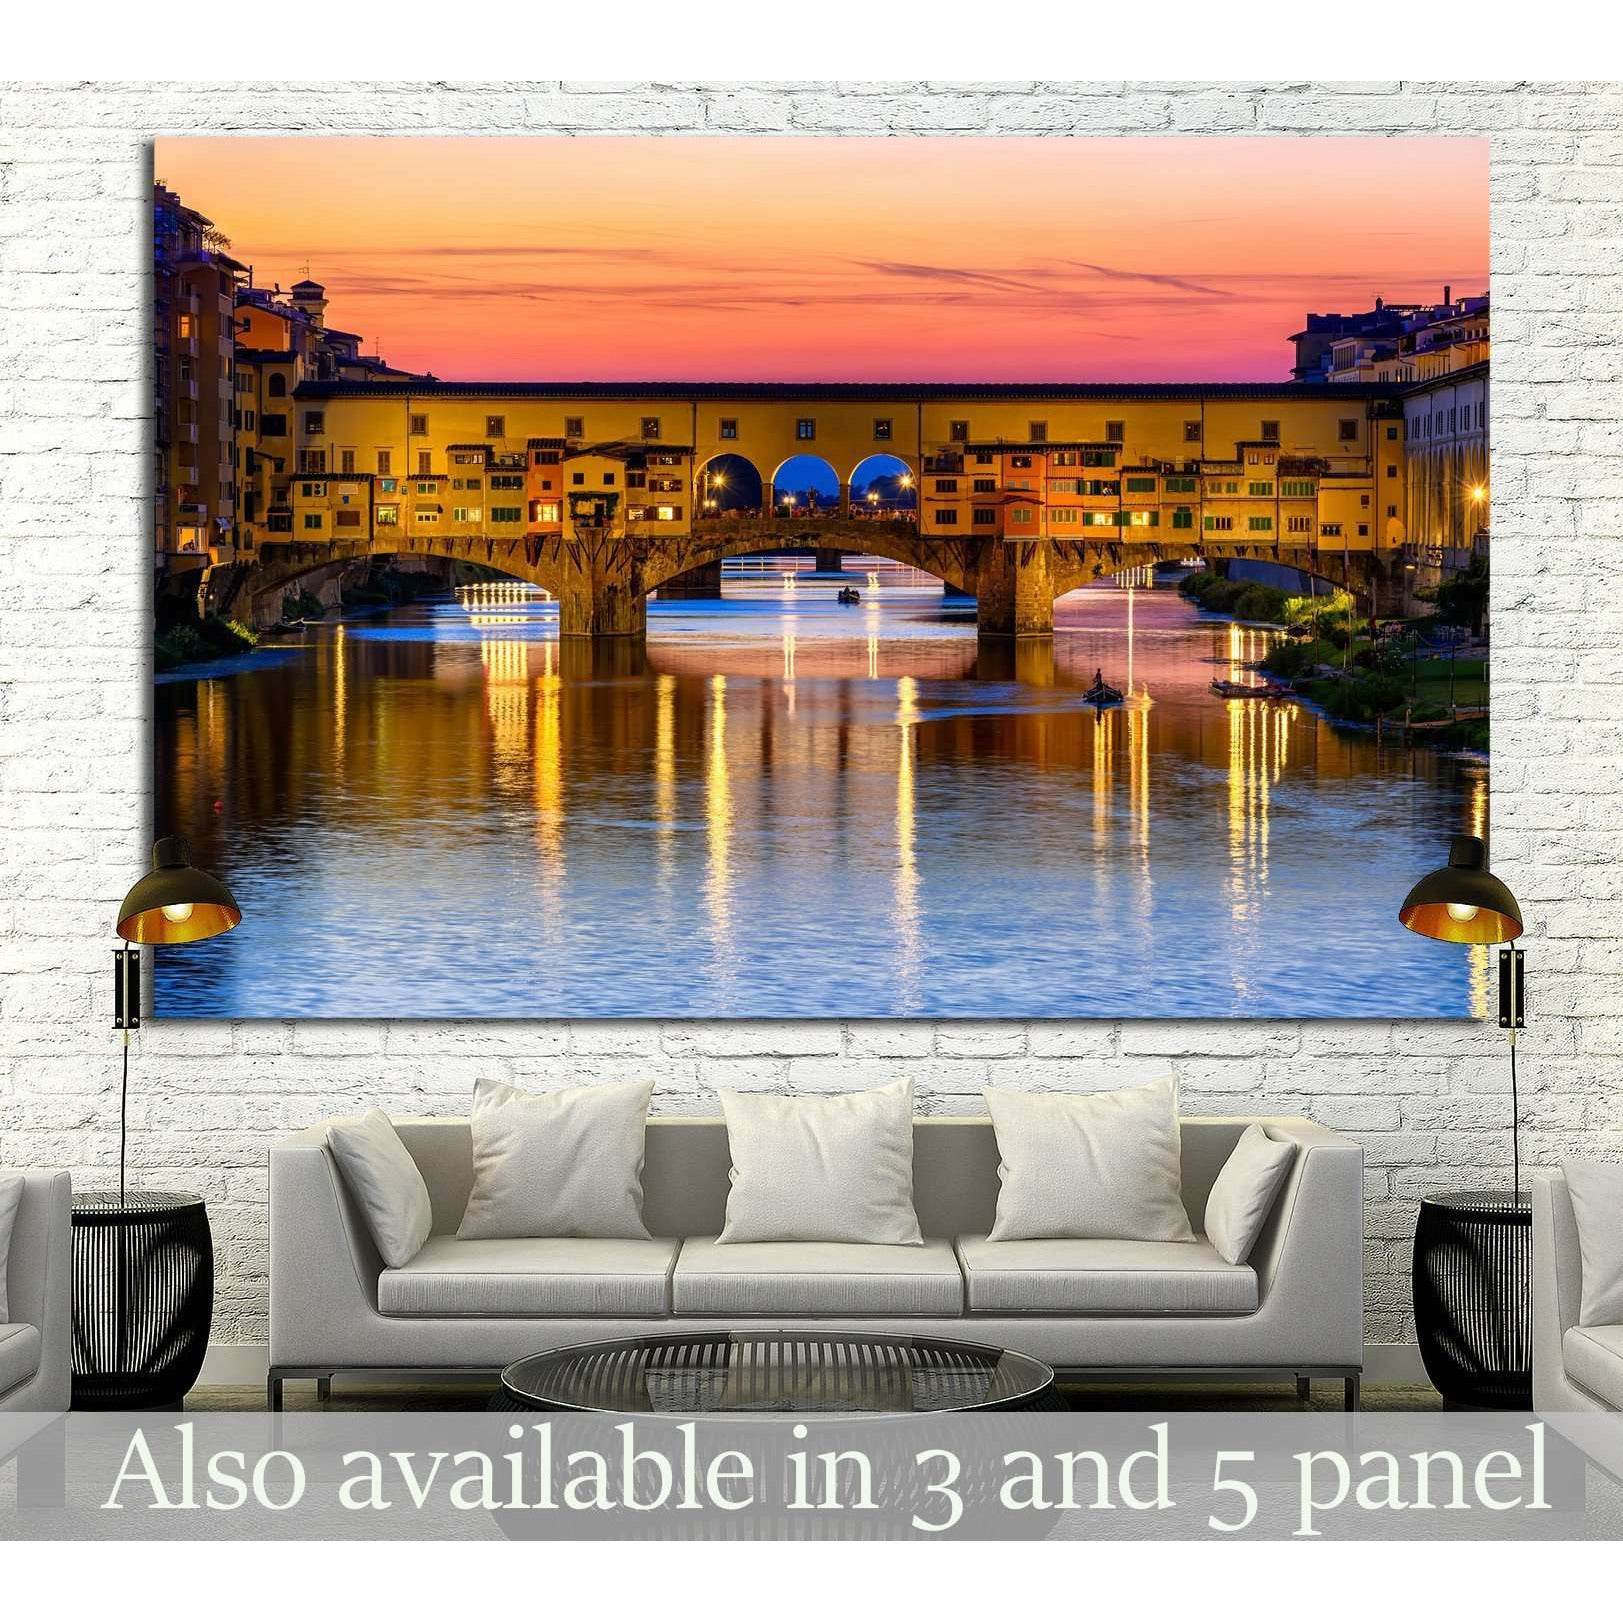 Ponte Vecchio over Arno River in Florence, Italy №1244 Ready to Hang Canvas Print